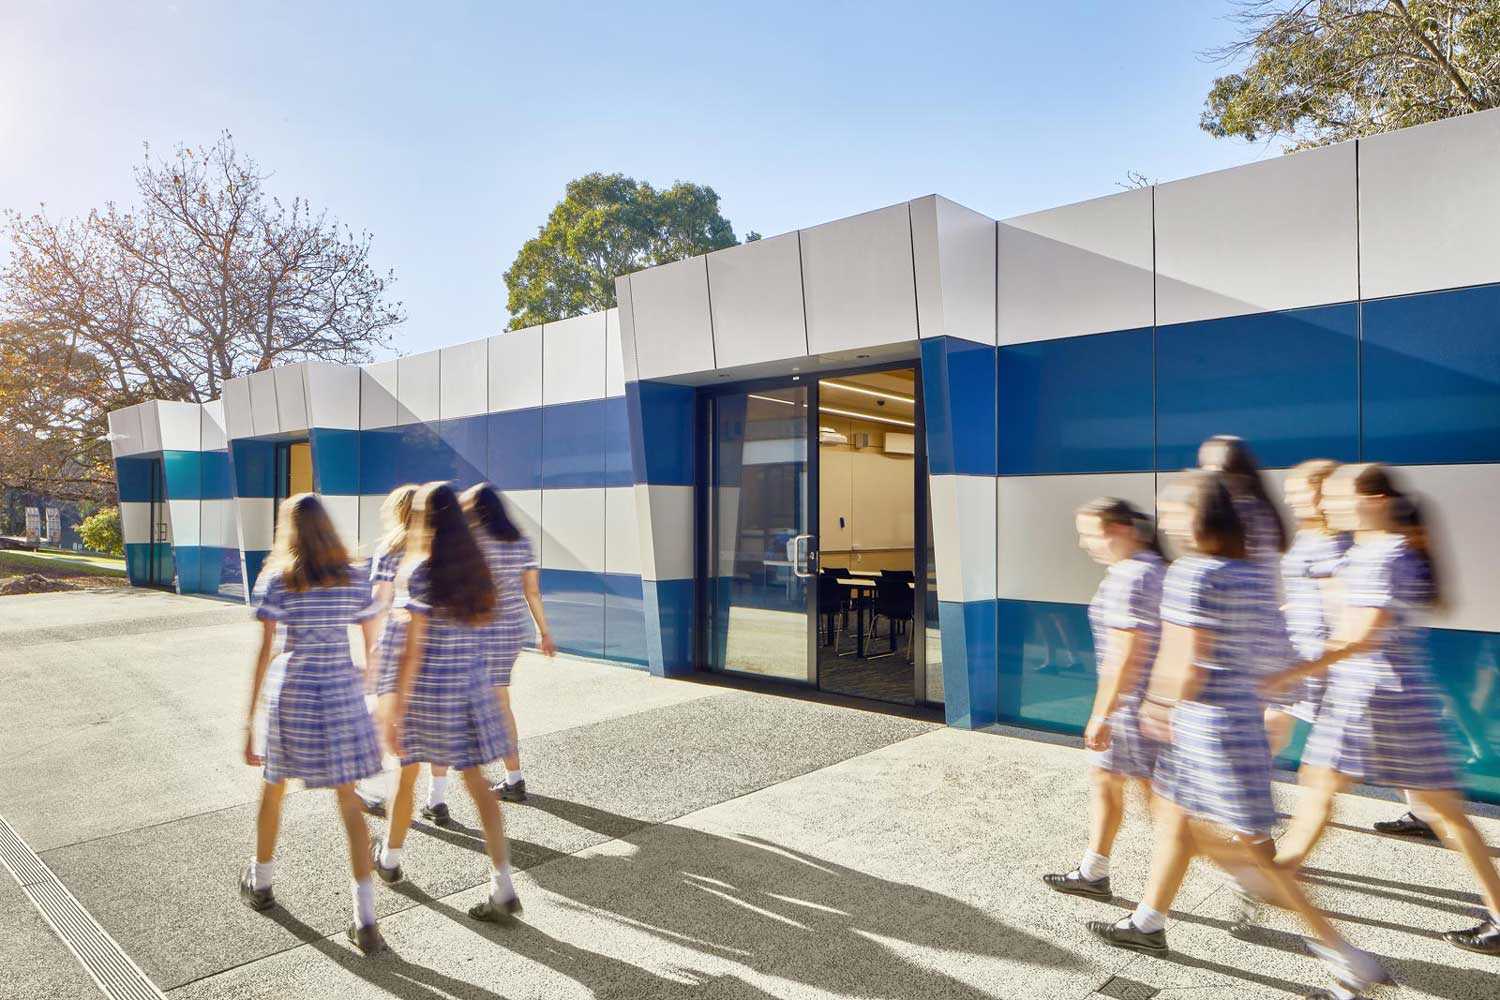 School Demountable Classrooms with students